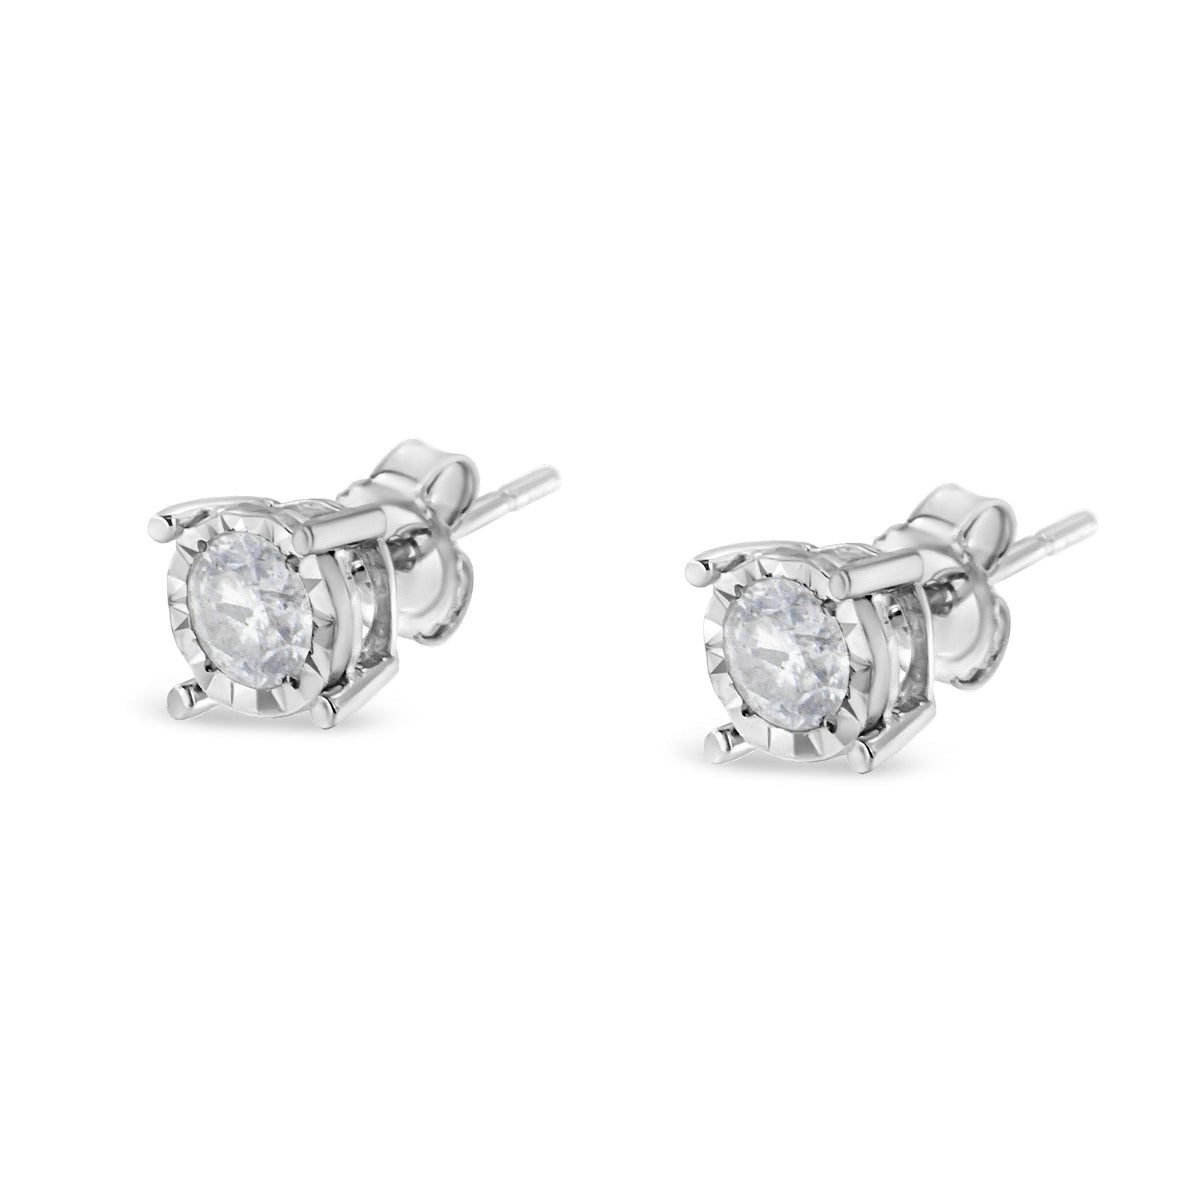 .925 Sterling Silver 1/2 Cttw Near Colorless Round Brilliant-Cut Diamond Miracle-Set Stud Earrings (H-I Color, I2-I3 Clarity) - LinkagejewelrydesignLinkagejewelrydesign